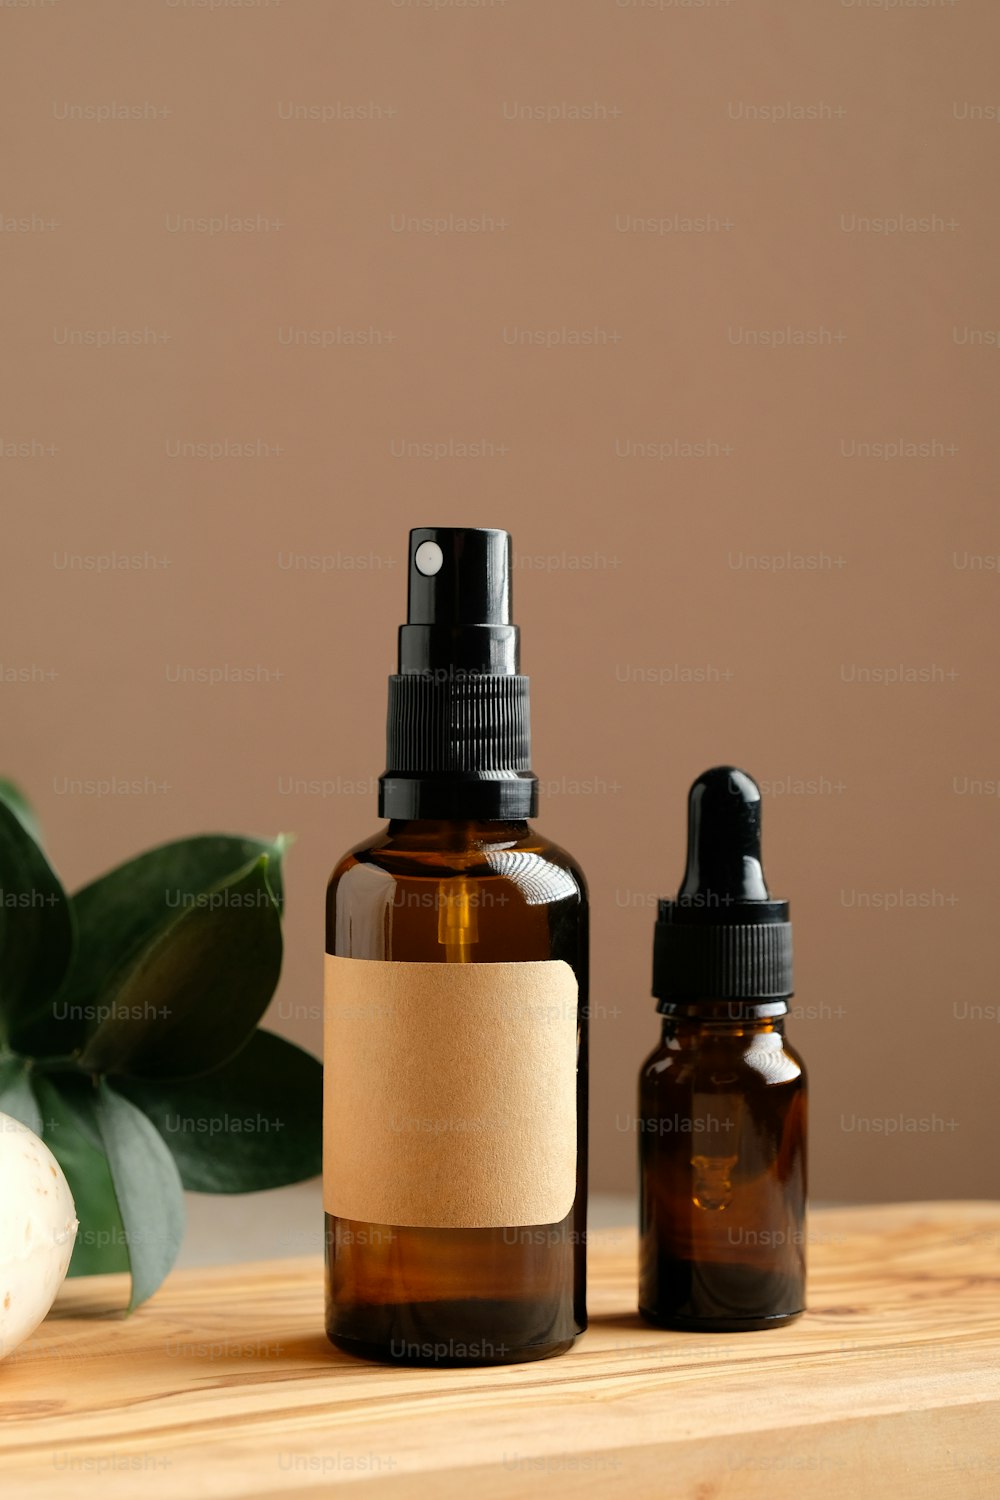 Set of natural organic SPA beauty products on wooden board. Amber glass spray bottle, homemade soap, serum, and green leaf. Bio cosmetics branding, packaging design.